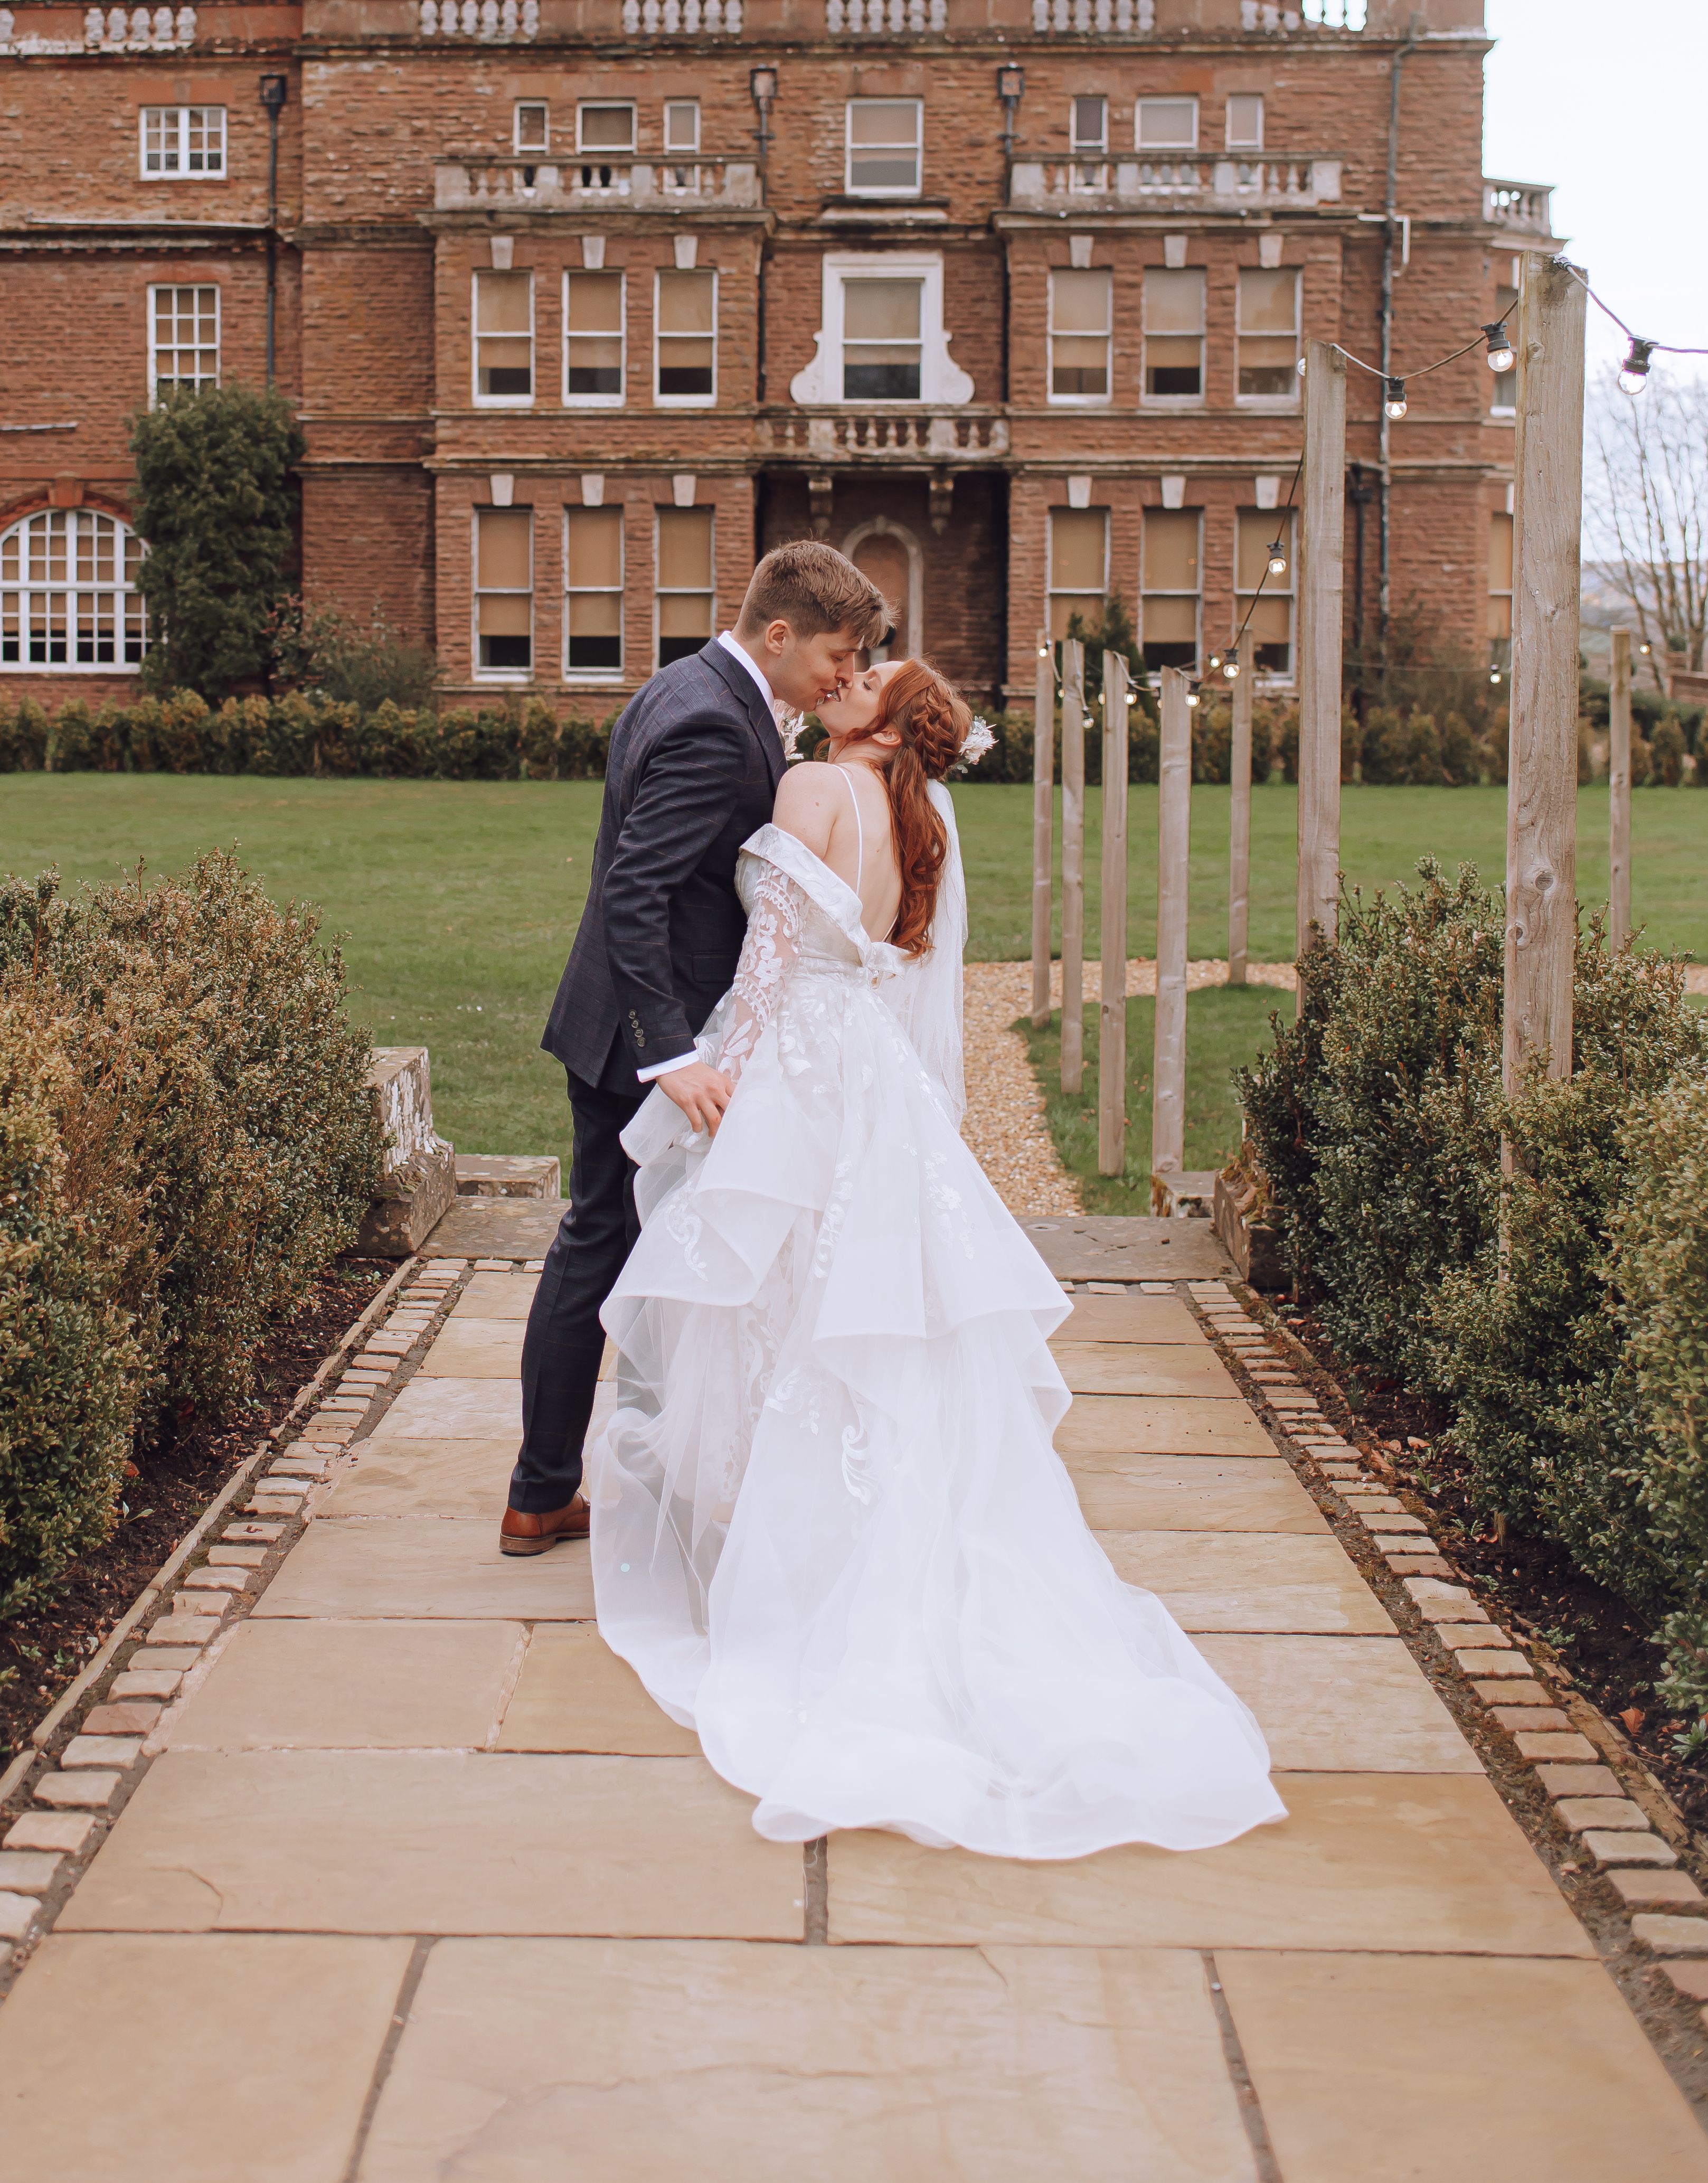 A bride and groom share an intimate moment outside a large, historic brick mansion. The groom is wearing a dark suit, and the bride is in an elaborate white wedding gown with lace details. They are standing close together on a paved pathway, surrounded by neatly trimmed hedges and a well-maintained lawn. The sky is overcast, adding a soft, romantic ambiance to the scene.